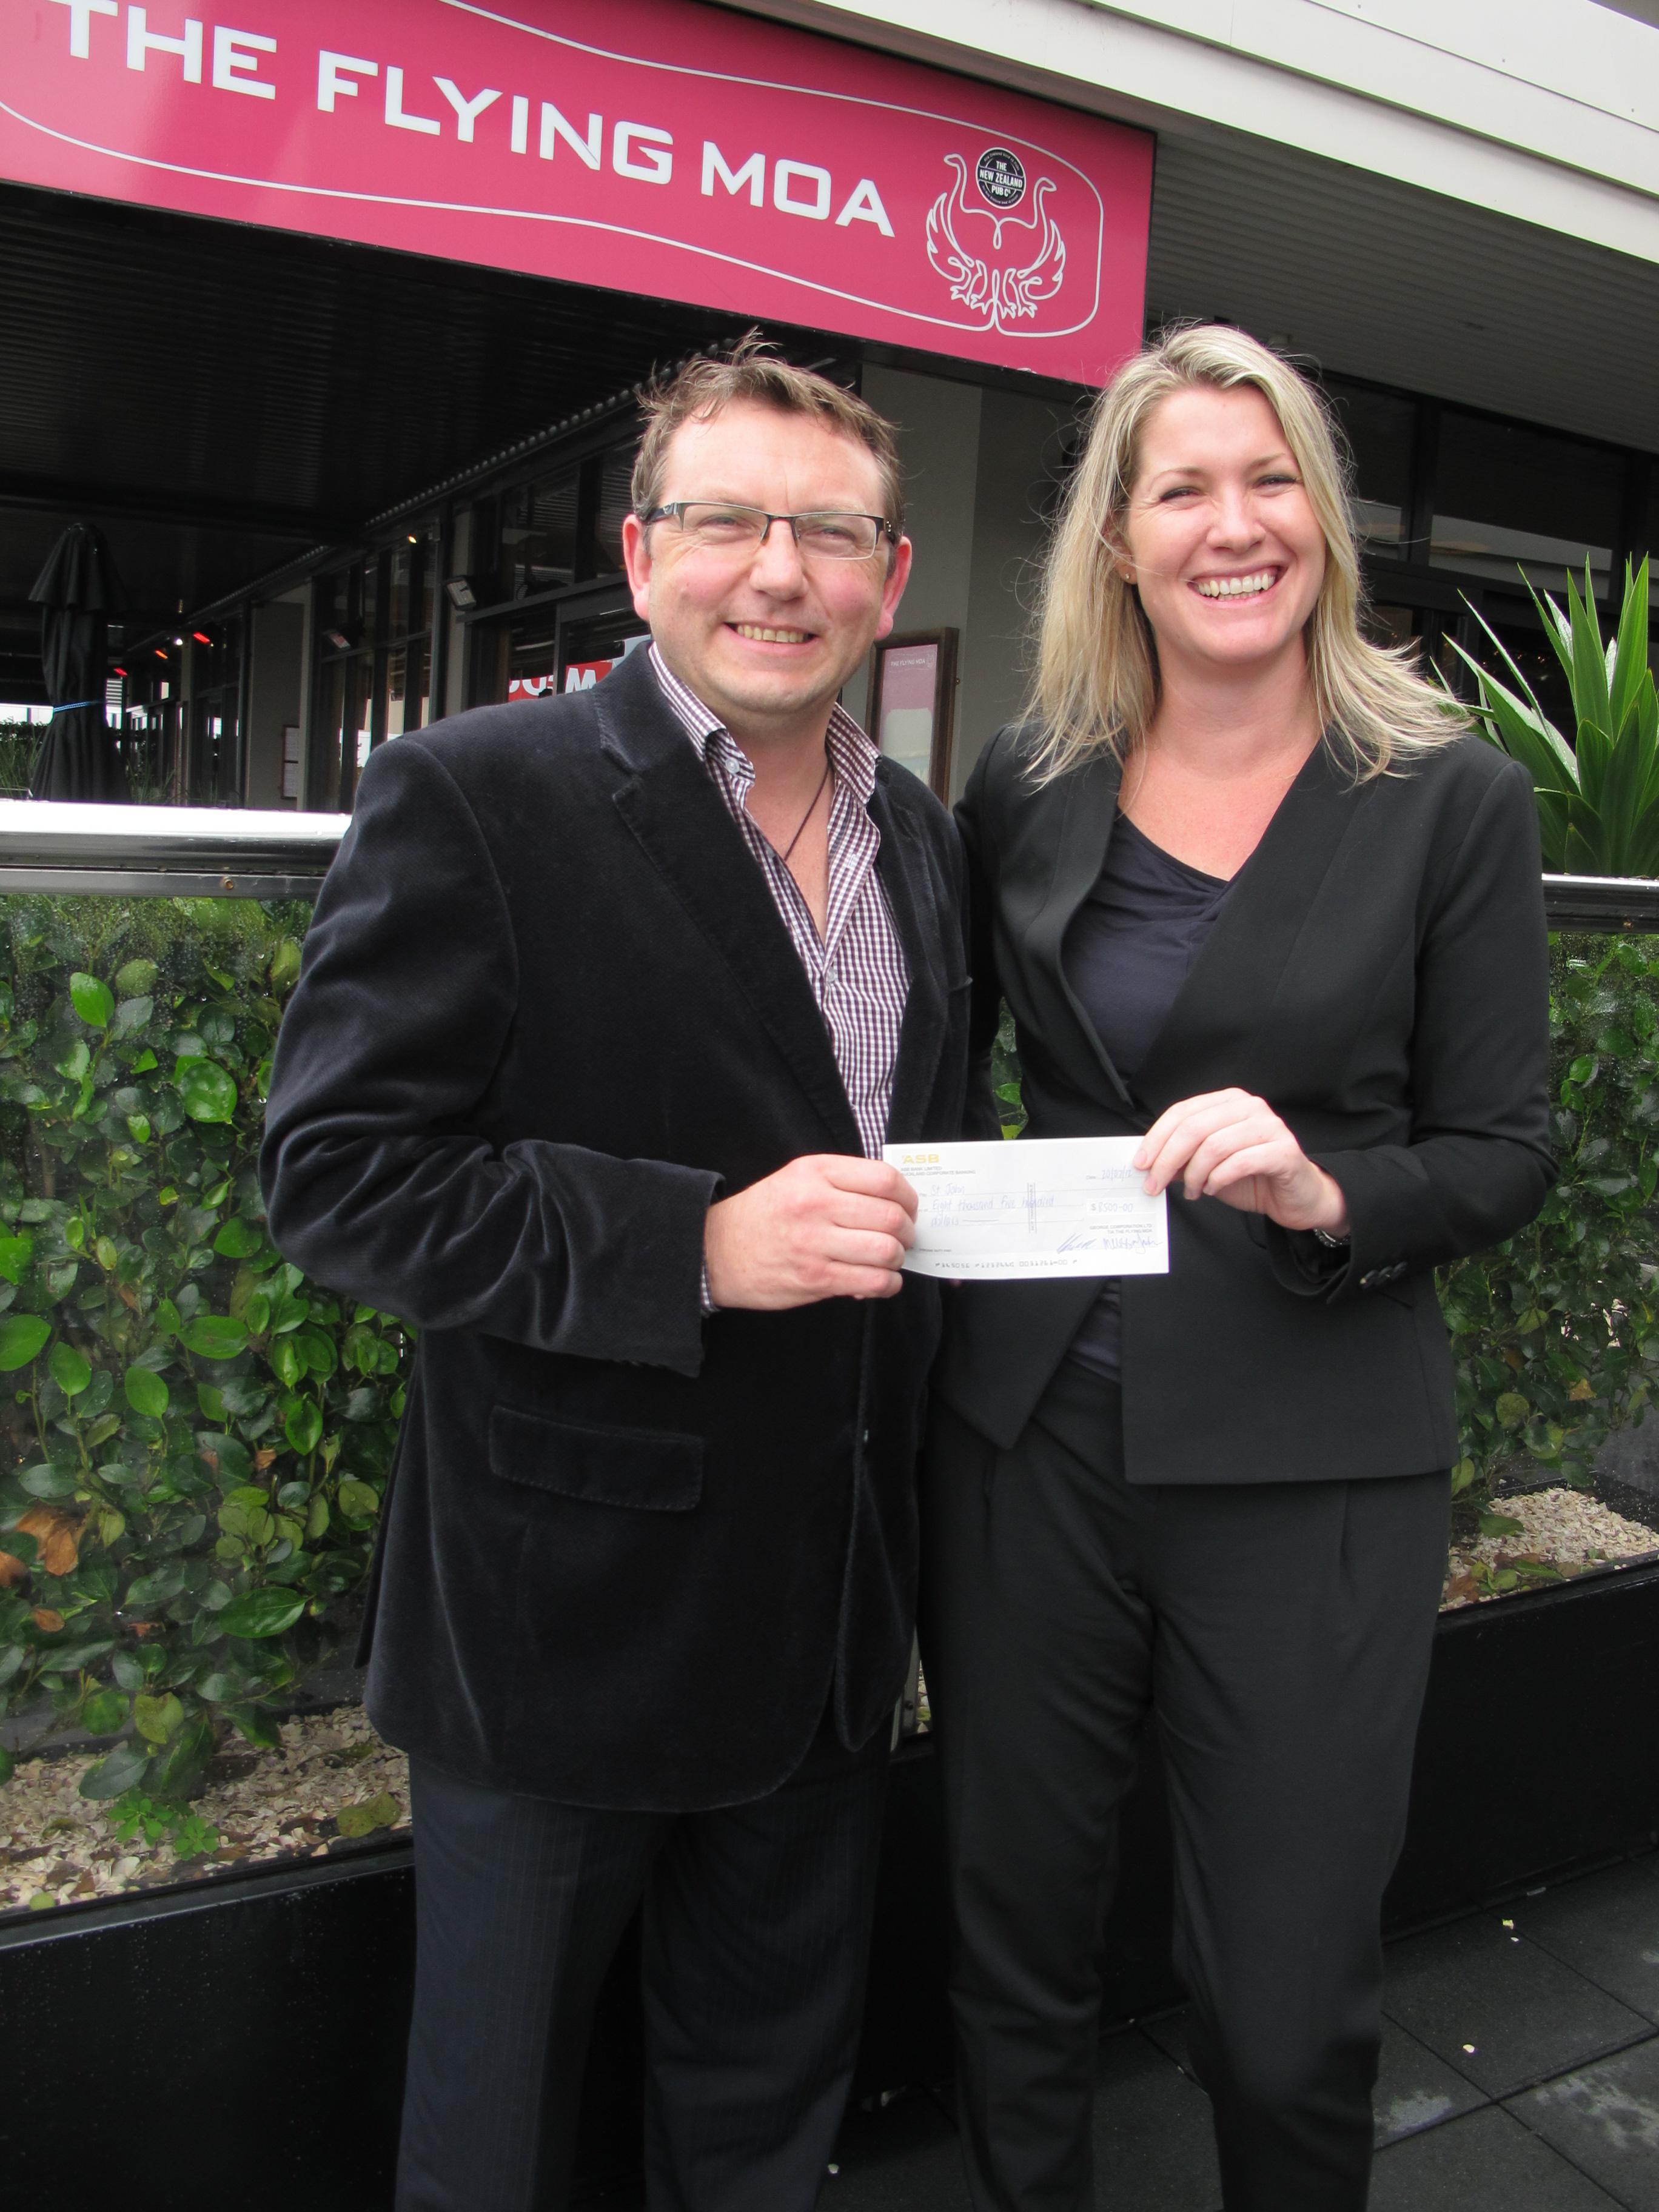 Lance Campbell, the Director of The Flying Moa presents a cheque for $8500 to Rachel Brooke, Acting Customers and Services Manager for St John.